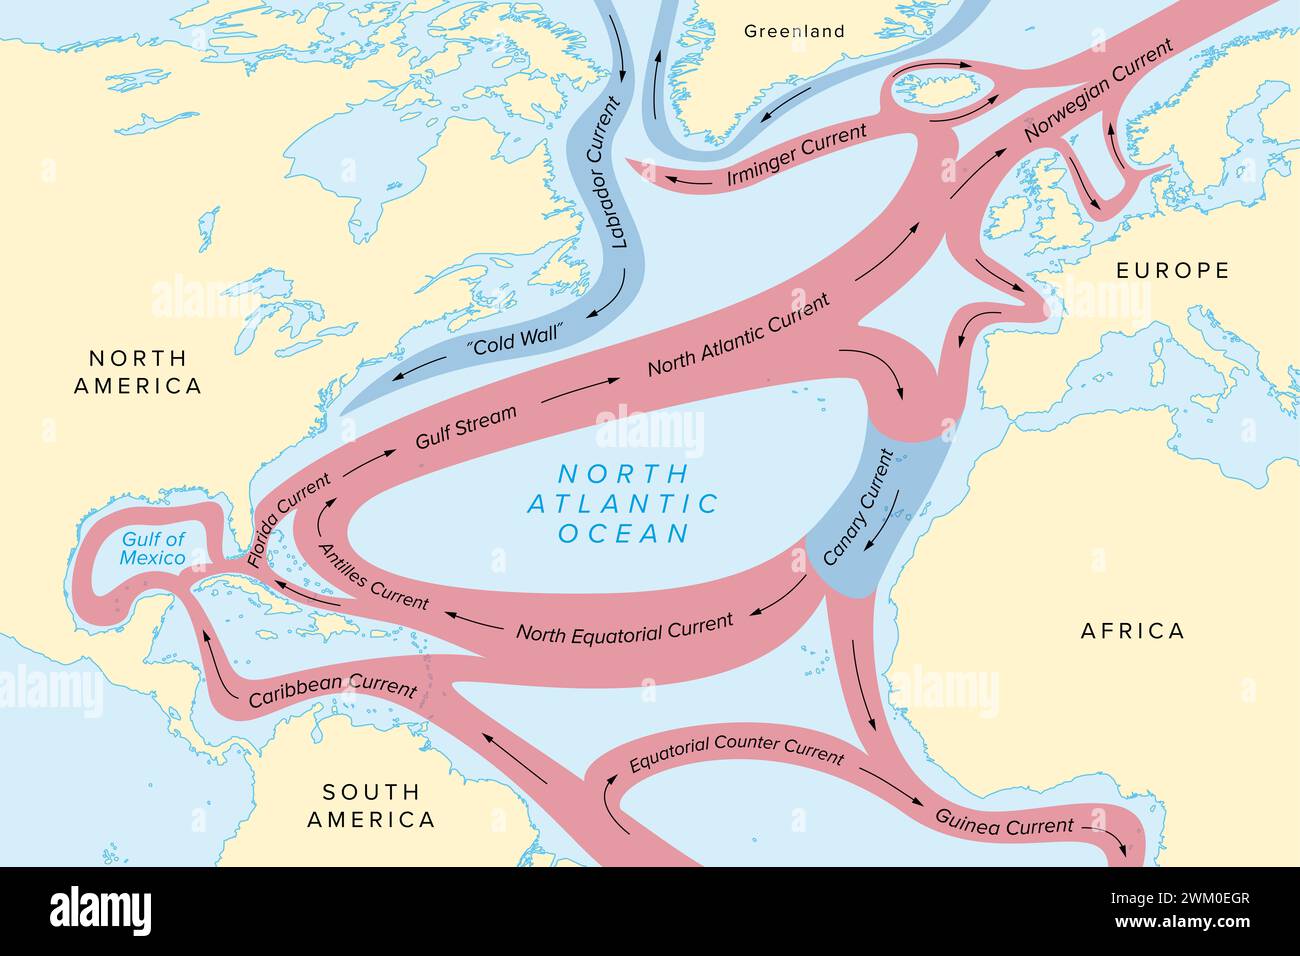 Map of North Atlantic Ocean currents, with Gulf Stream and other major ocean currents, red color for warm and blue color for cold currents. Stock Photo